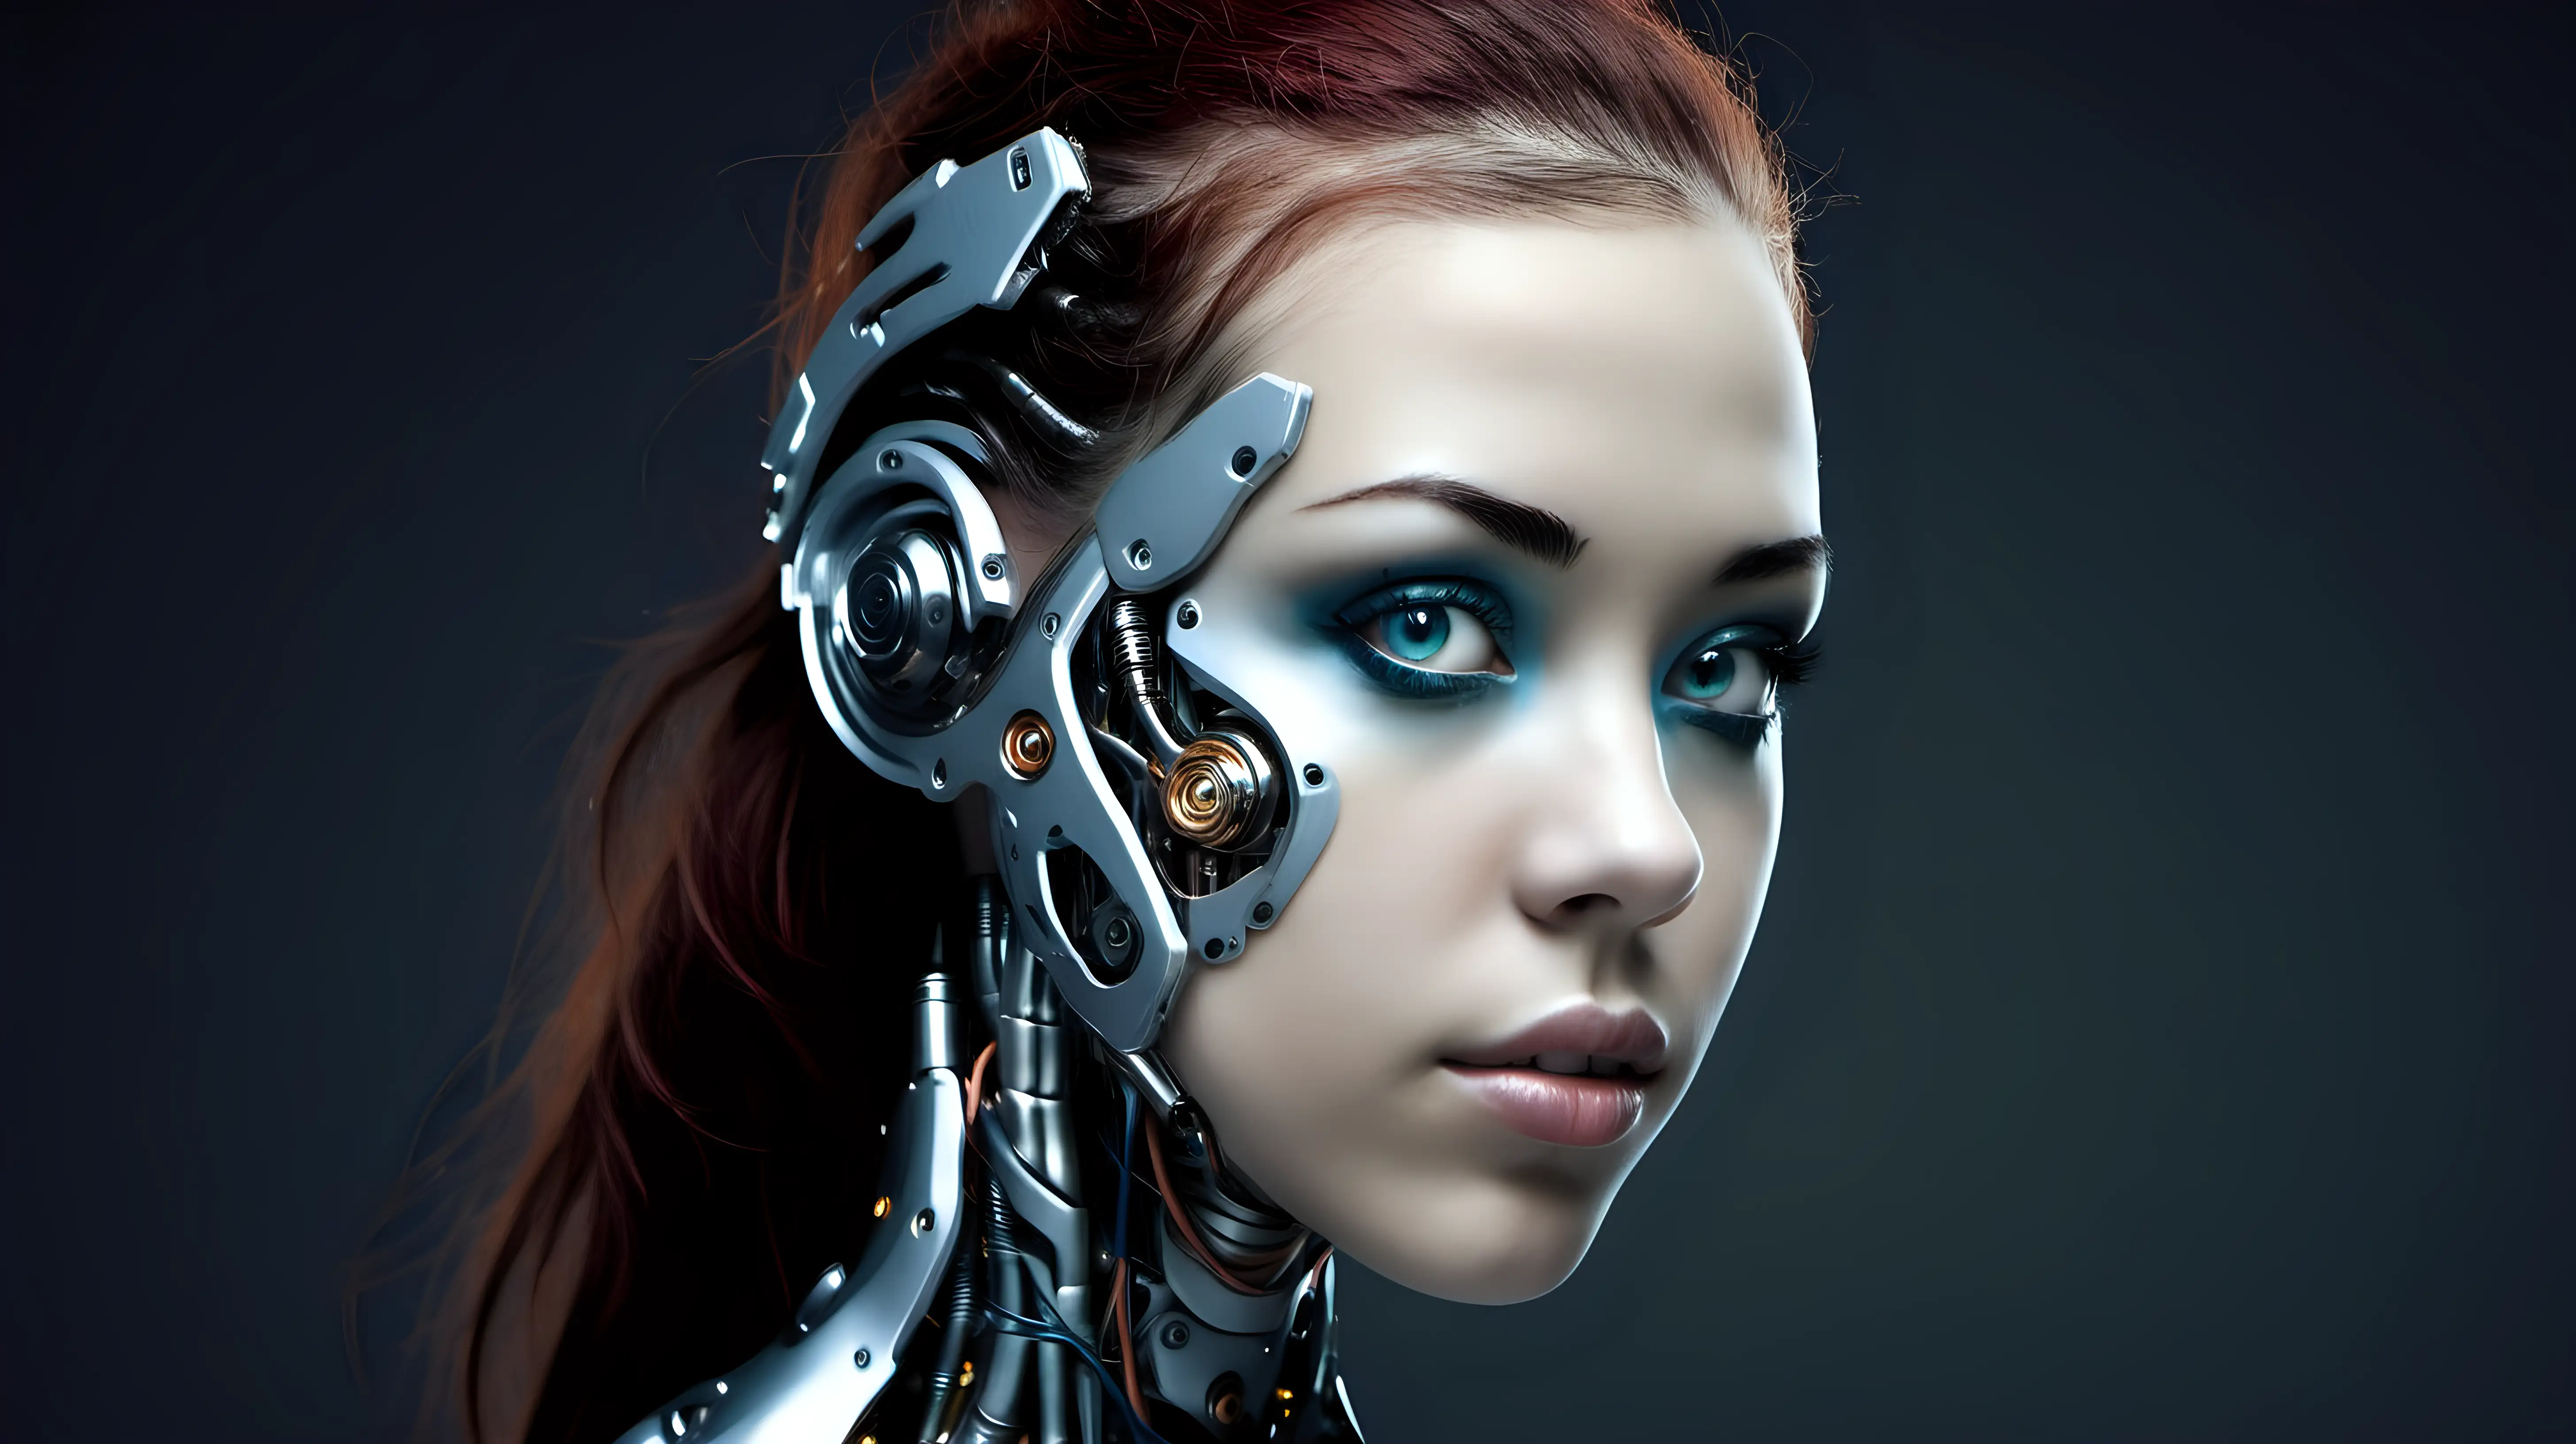 Beautiful 18YearOld Cyborg Woman with Exquisite Cyborg Features